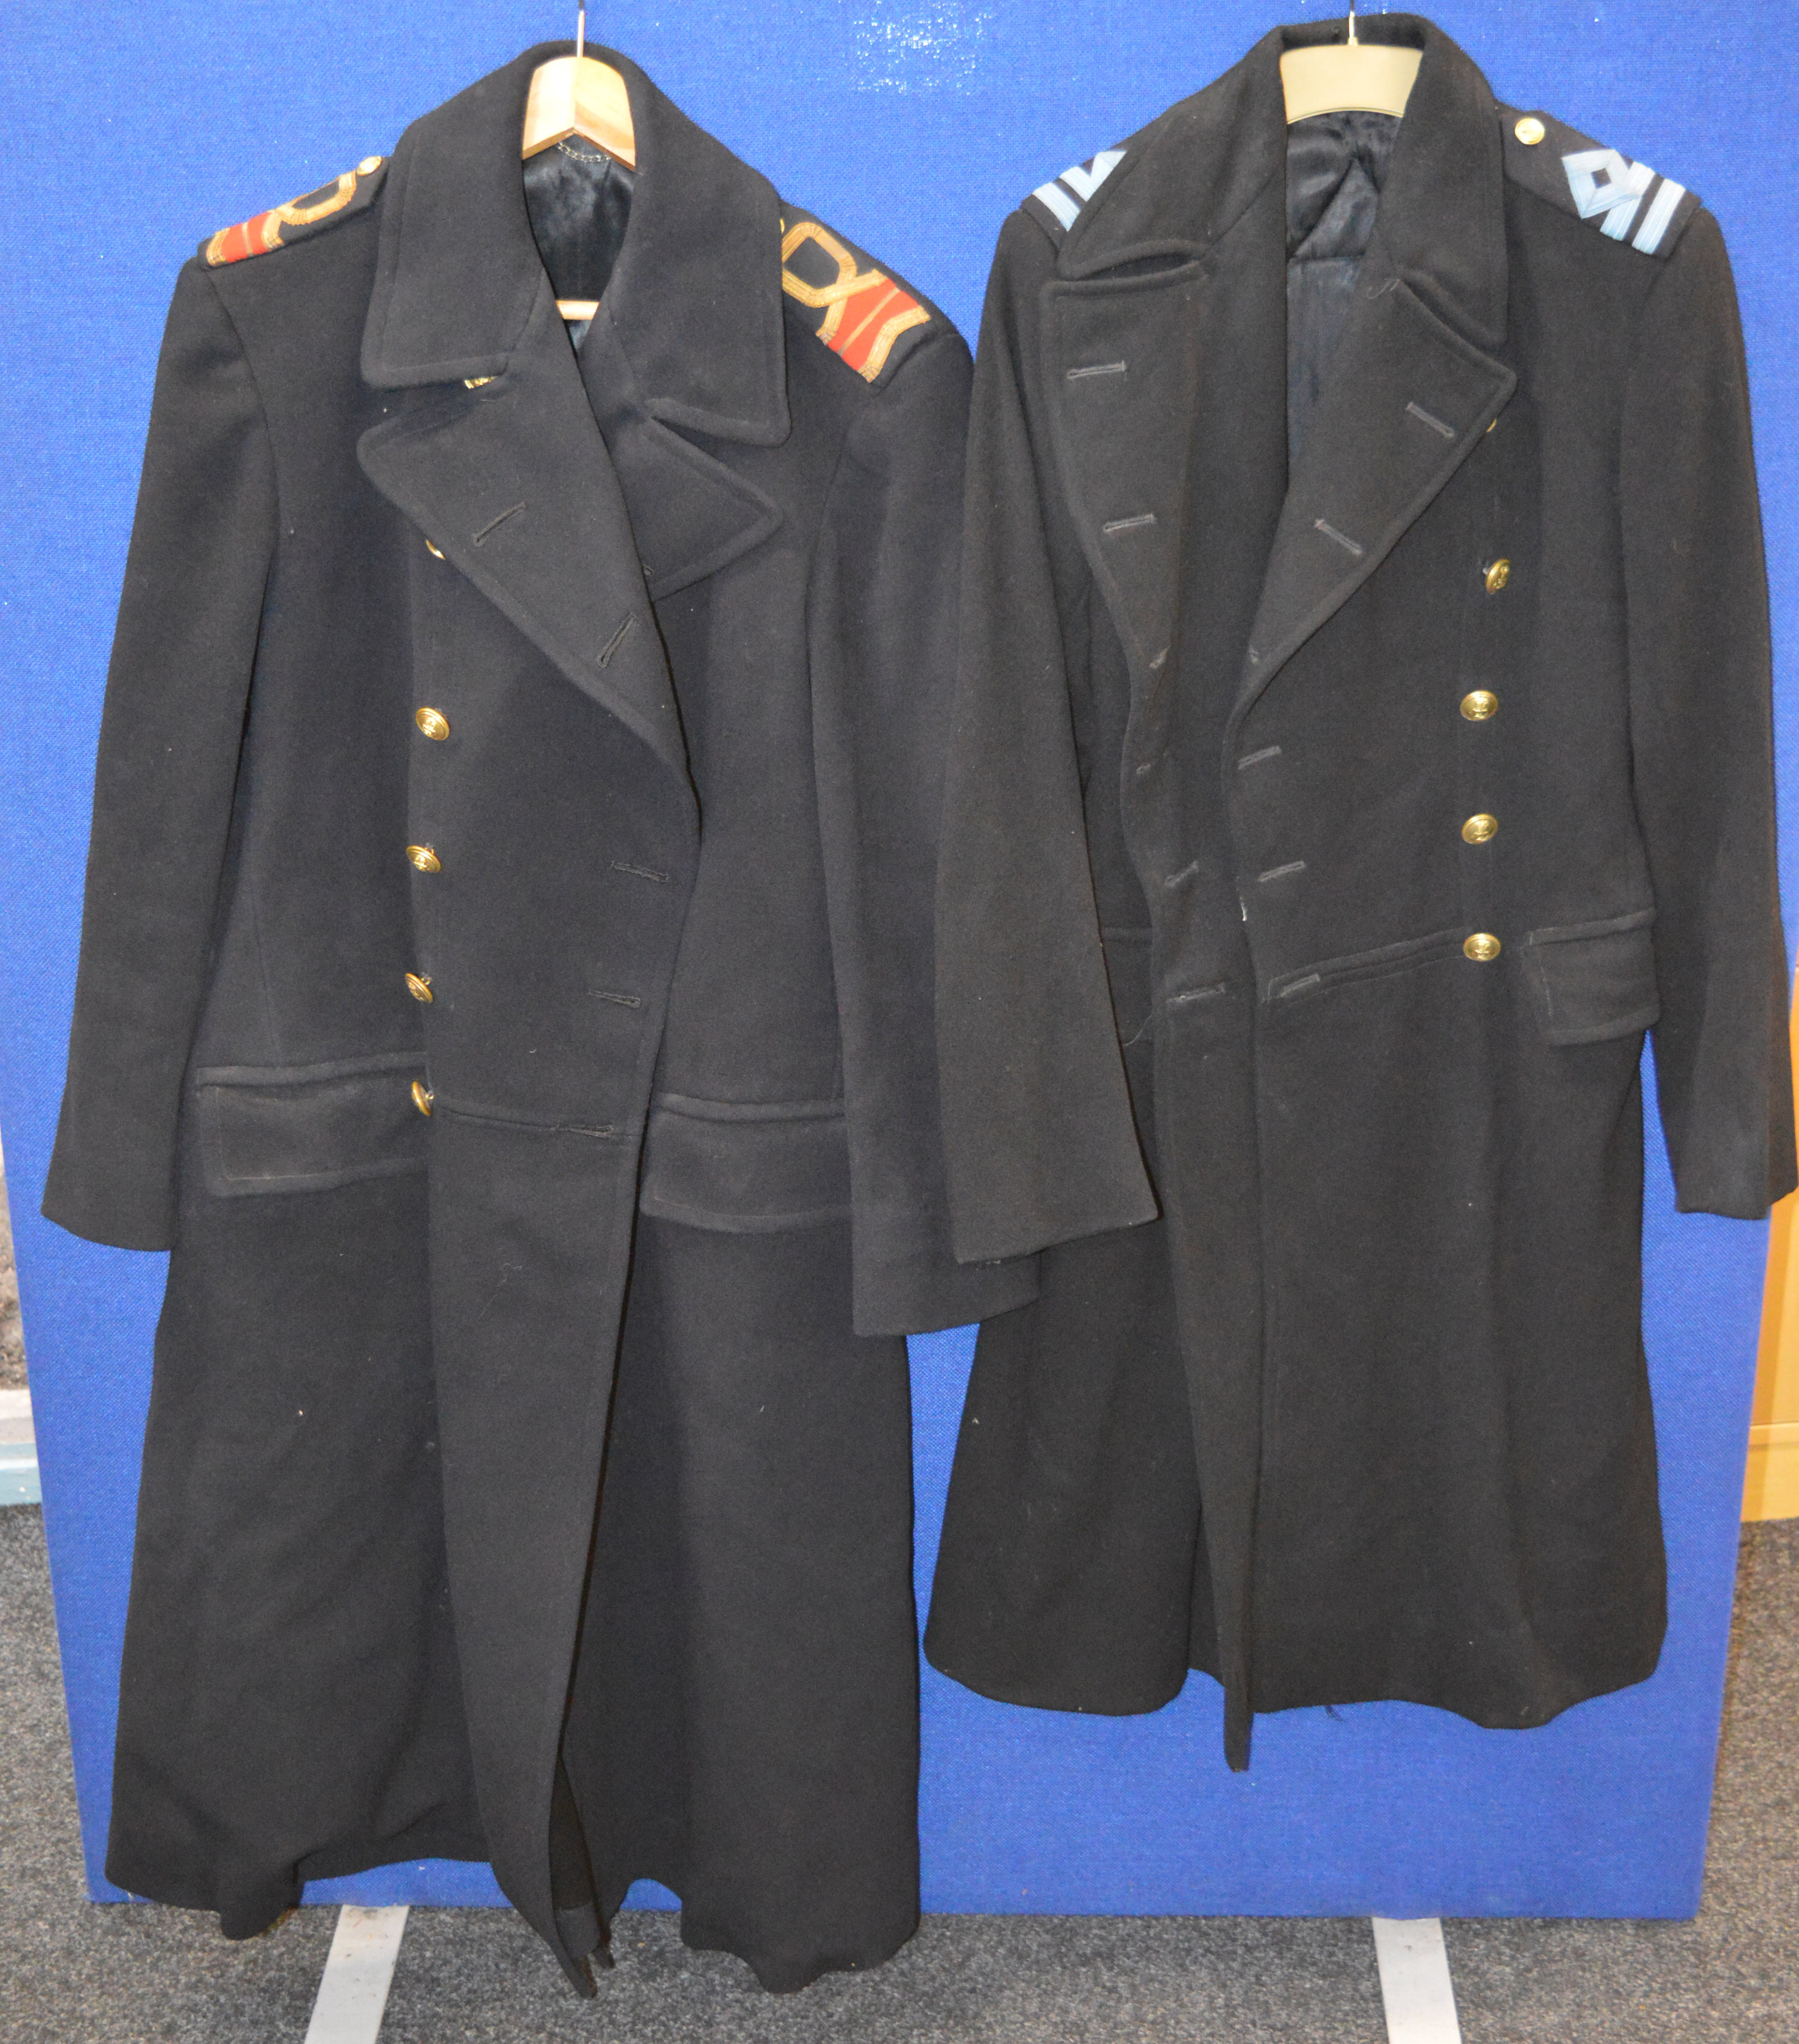 4 Royal Naval coats together with a Gieves & Hawkes officers cap and vario